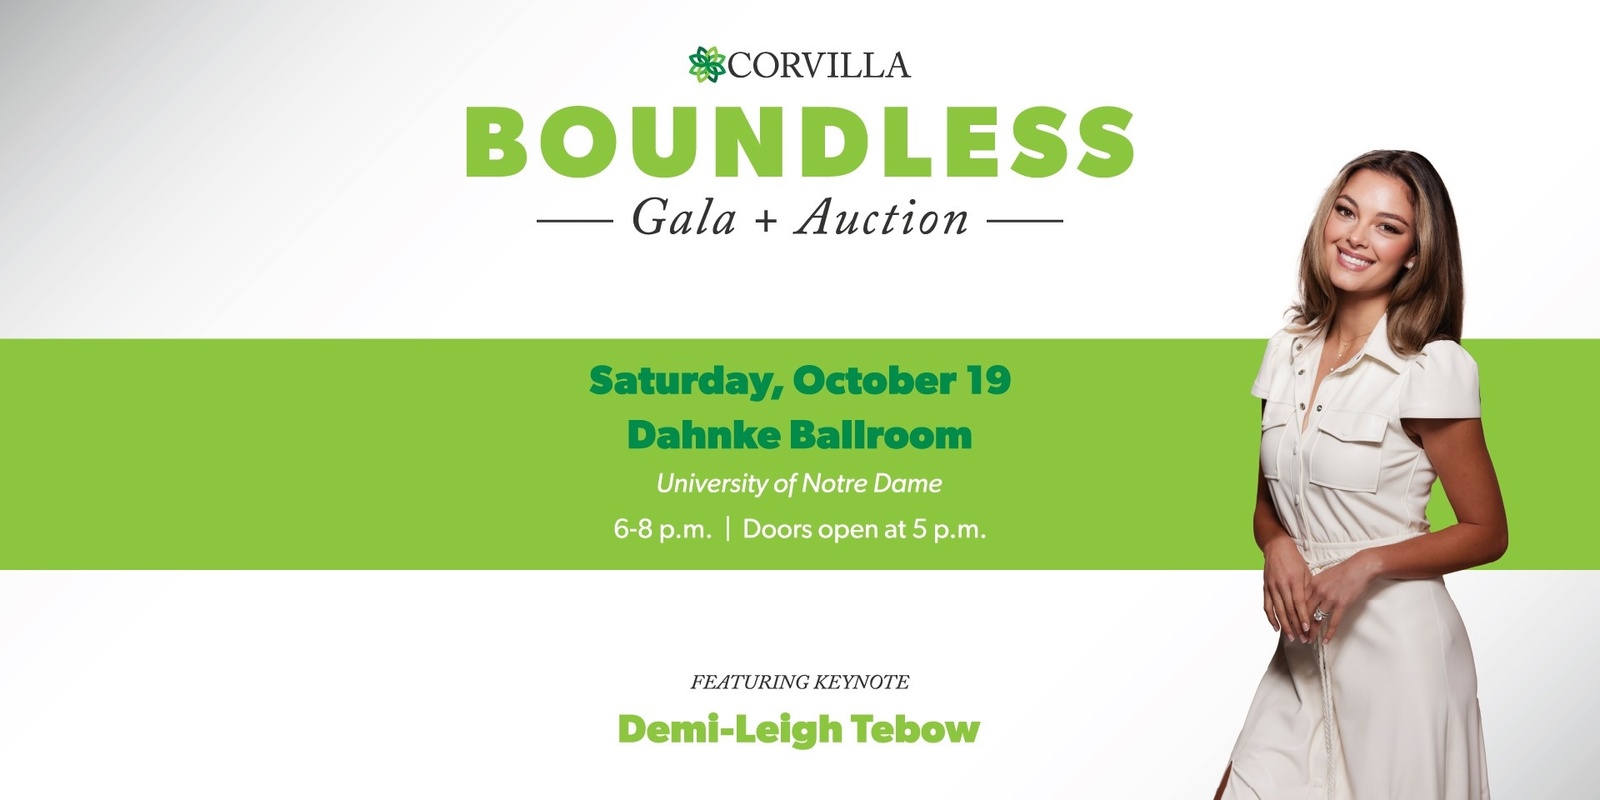 Banner image for Corvilla's Boundless Gala + Auction